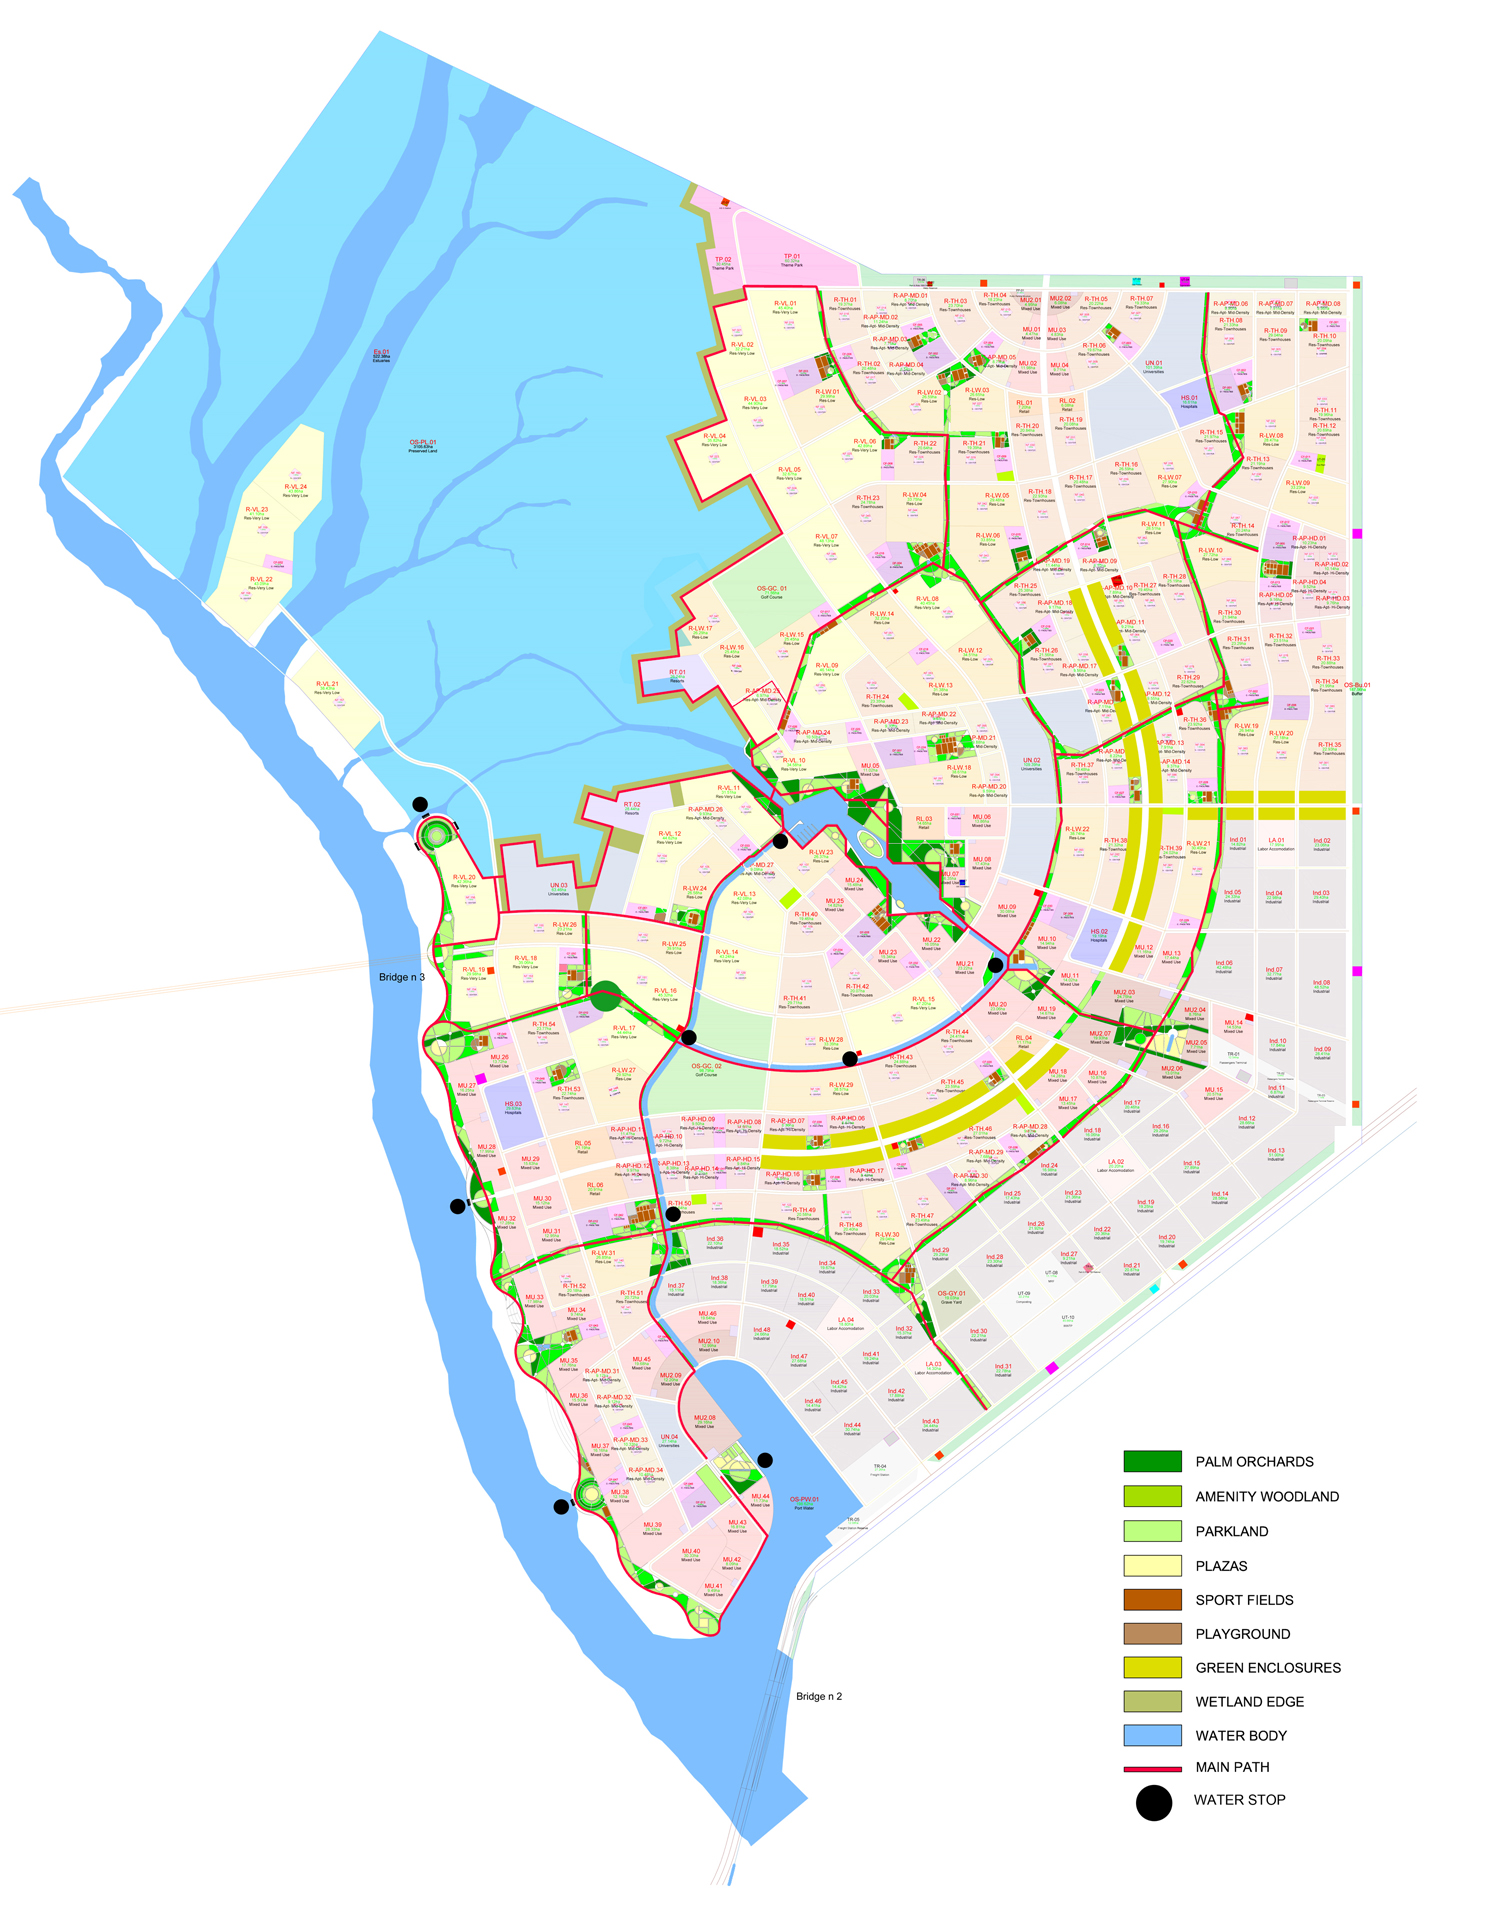 Madinat al Nakheel landscape master plan. Key features include Central Green Spine; soft mobility network, Green Corridors and Waterways; Khor Abdallah Waterfront; Shelterbelts; Protected landscape walk